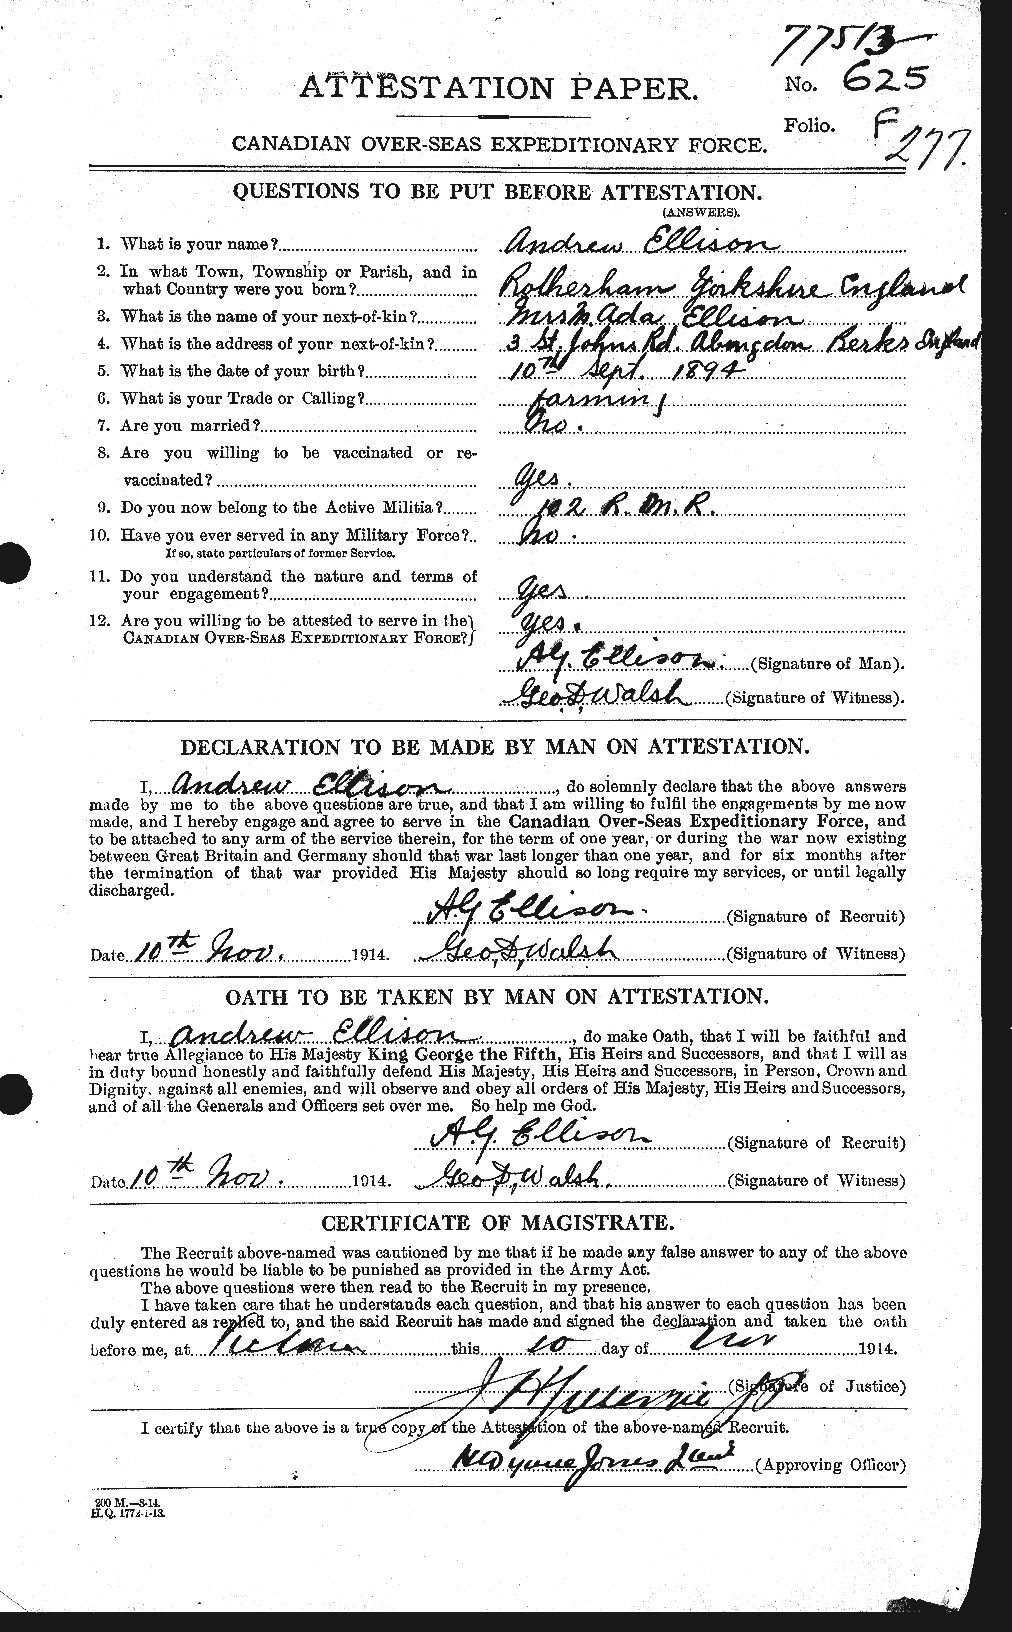 Personnel Records of the First World War - CEF 310920a